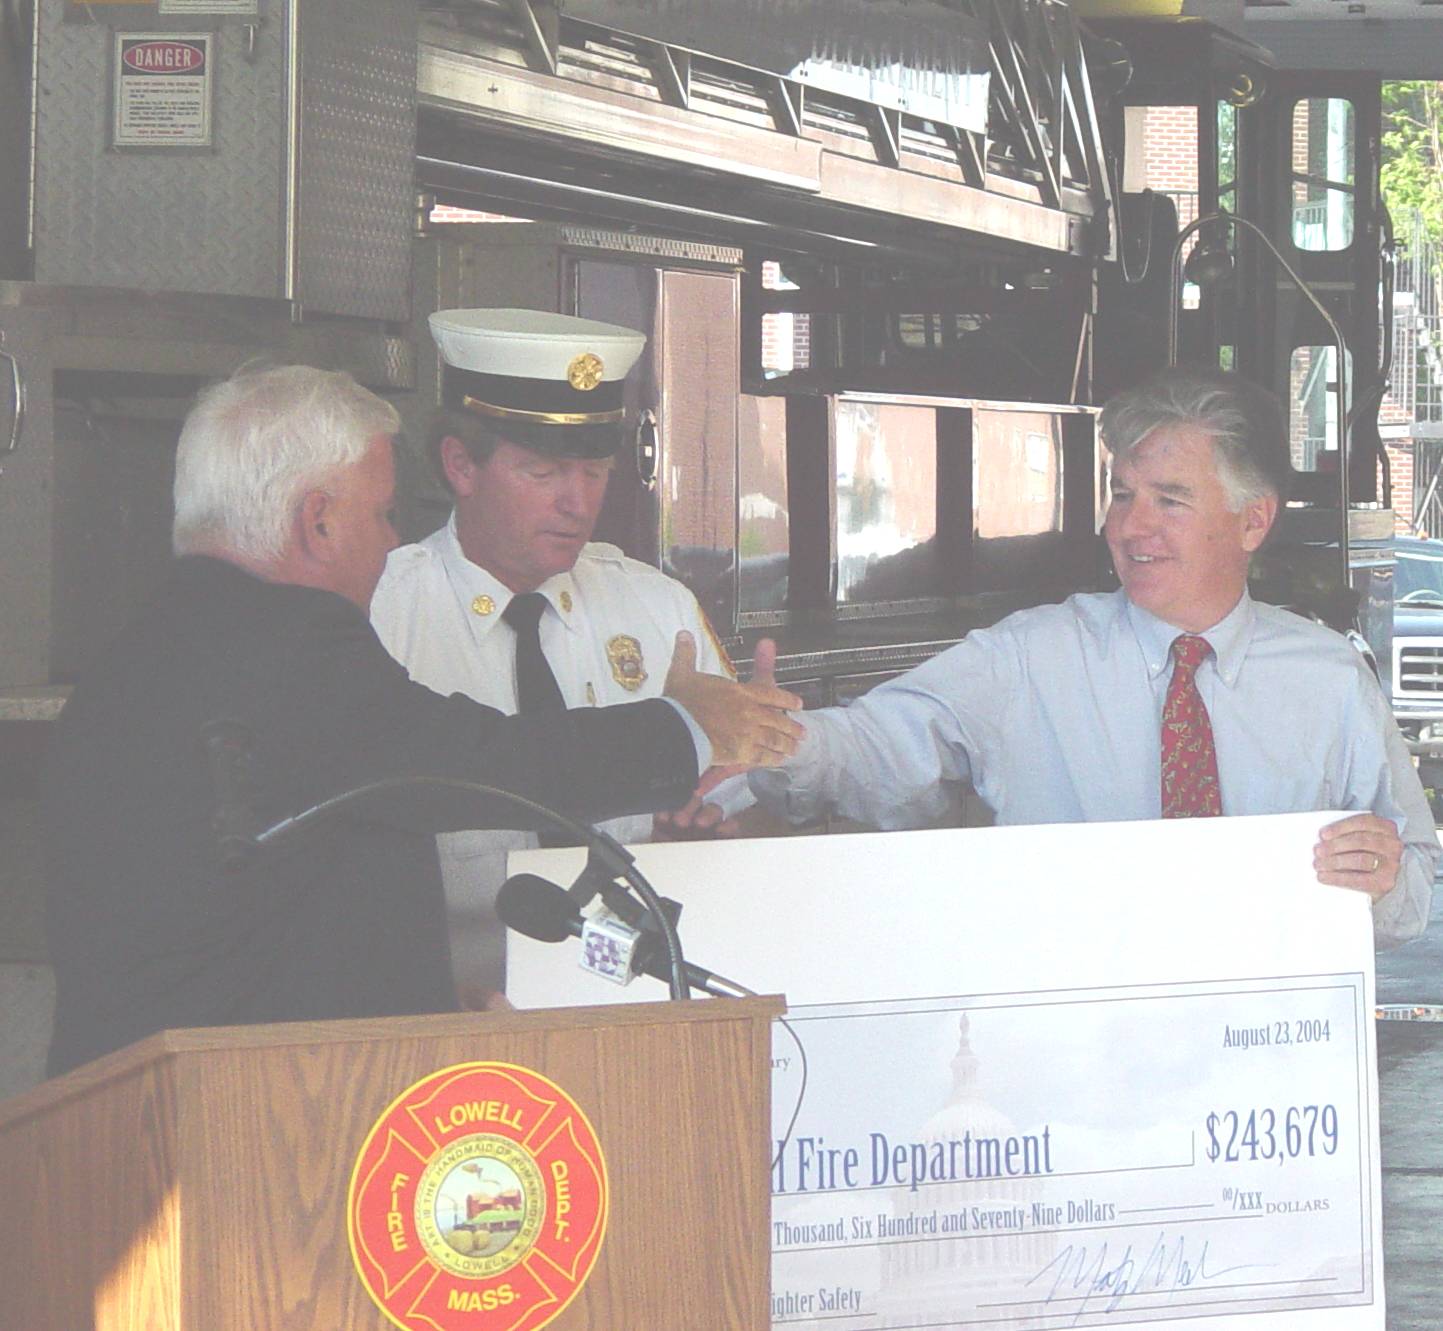 August 23, 2004: Lowell Fire Department Grant Announcement; The U.S. Department of Homeland Security awarded $243,679 for firefighter safety equipment. Congressman Meehan (right) hands check to Lowell Fire Chief William Desrosiers (middle) and shakes hands with City Manager John Cox (left).